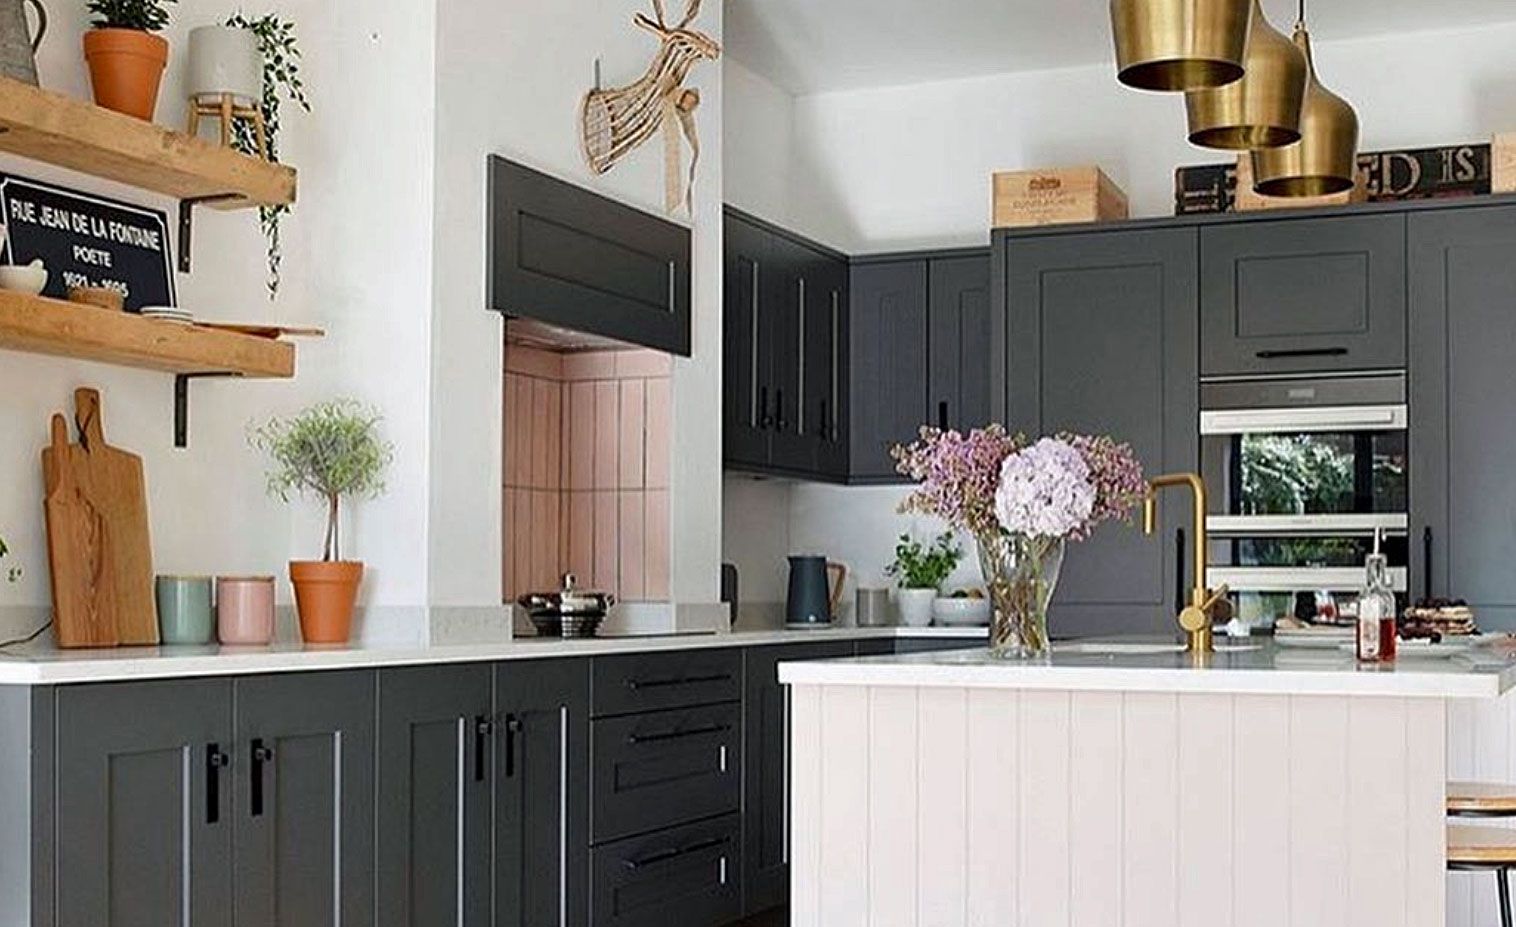 The 10 best Instagram accounts to follow for kitchen makeovers | Real Homes